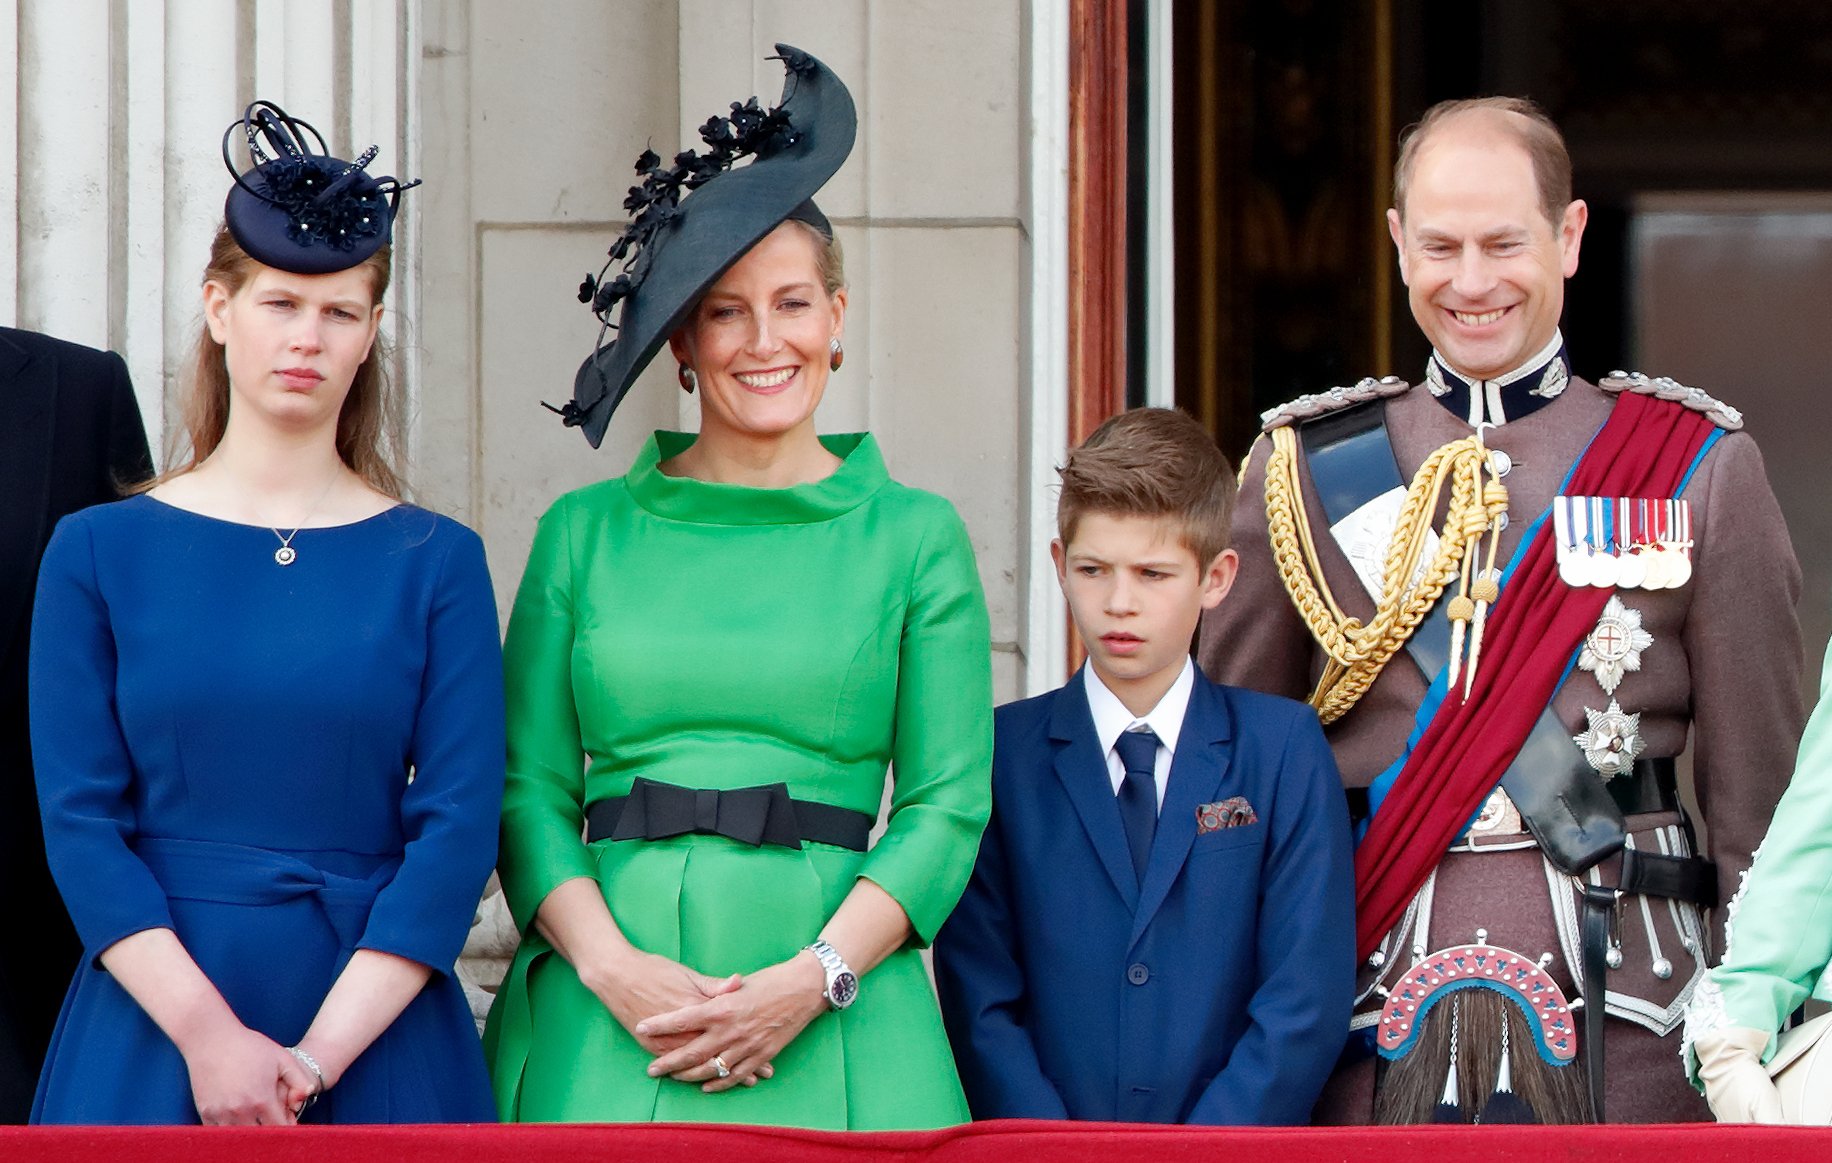 Prince Edward and Sophie Wessex with their two children at Buckingham palace in 2019. | Source: Getty Images